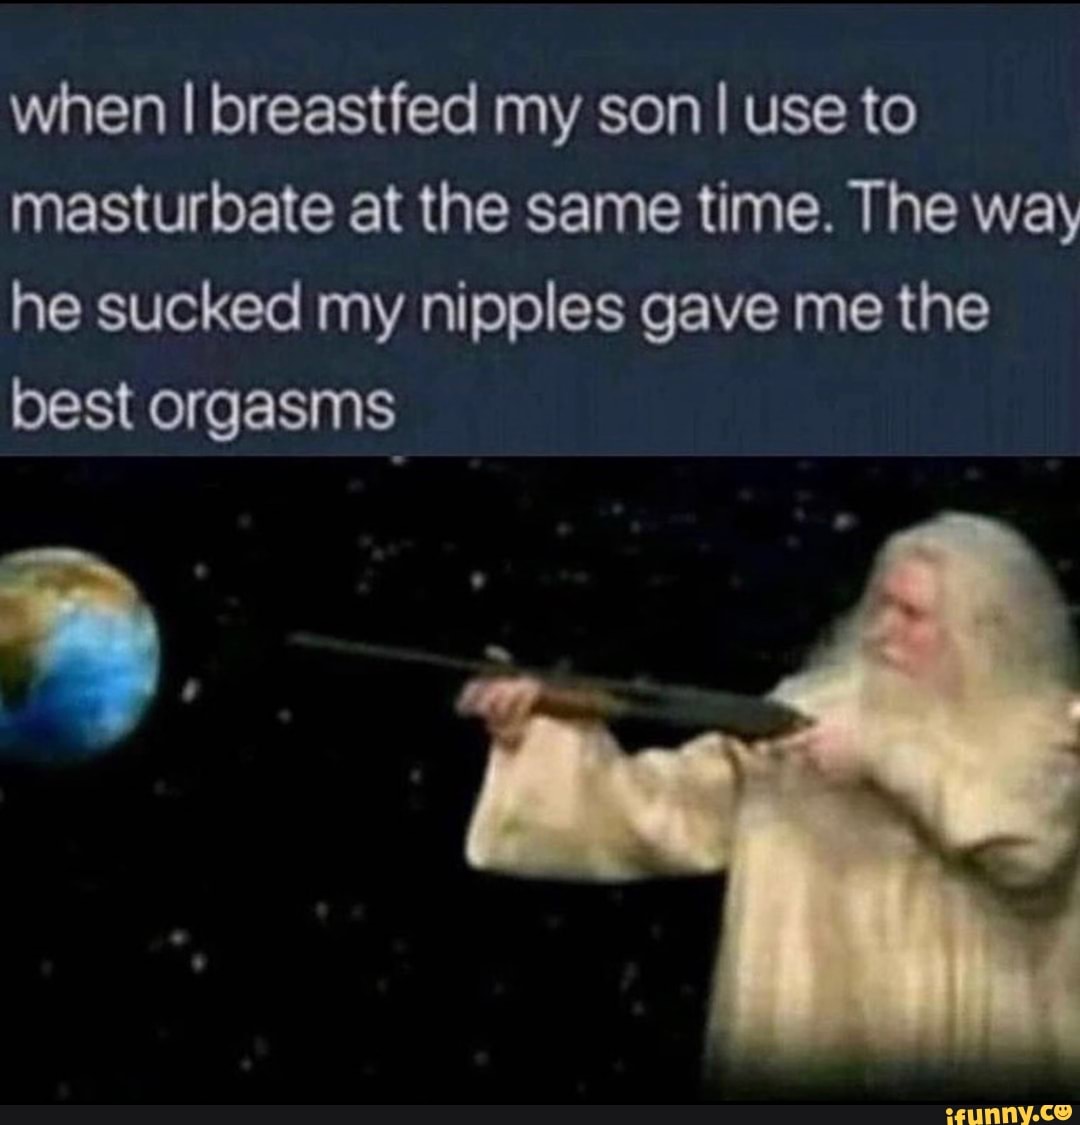 When I Breastfed My Son I Use To Masturbate At The Same Time The Way